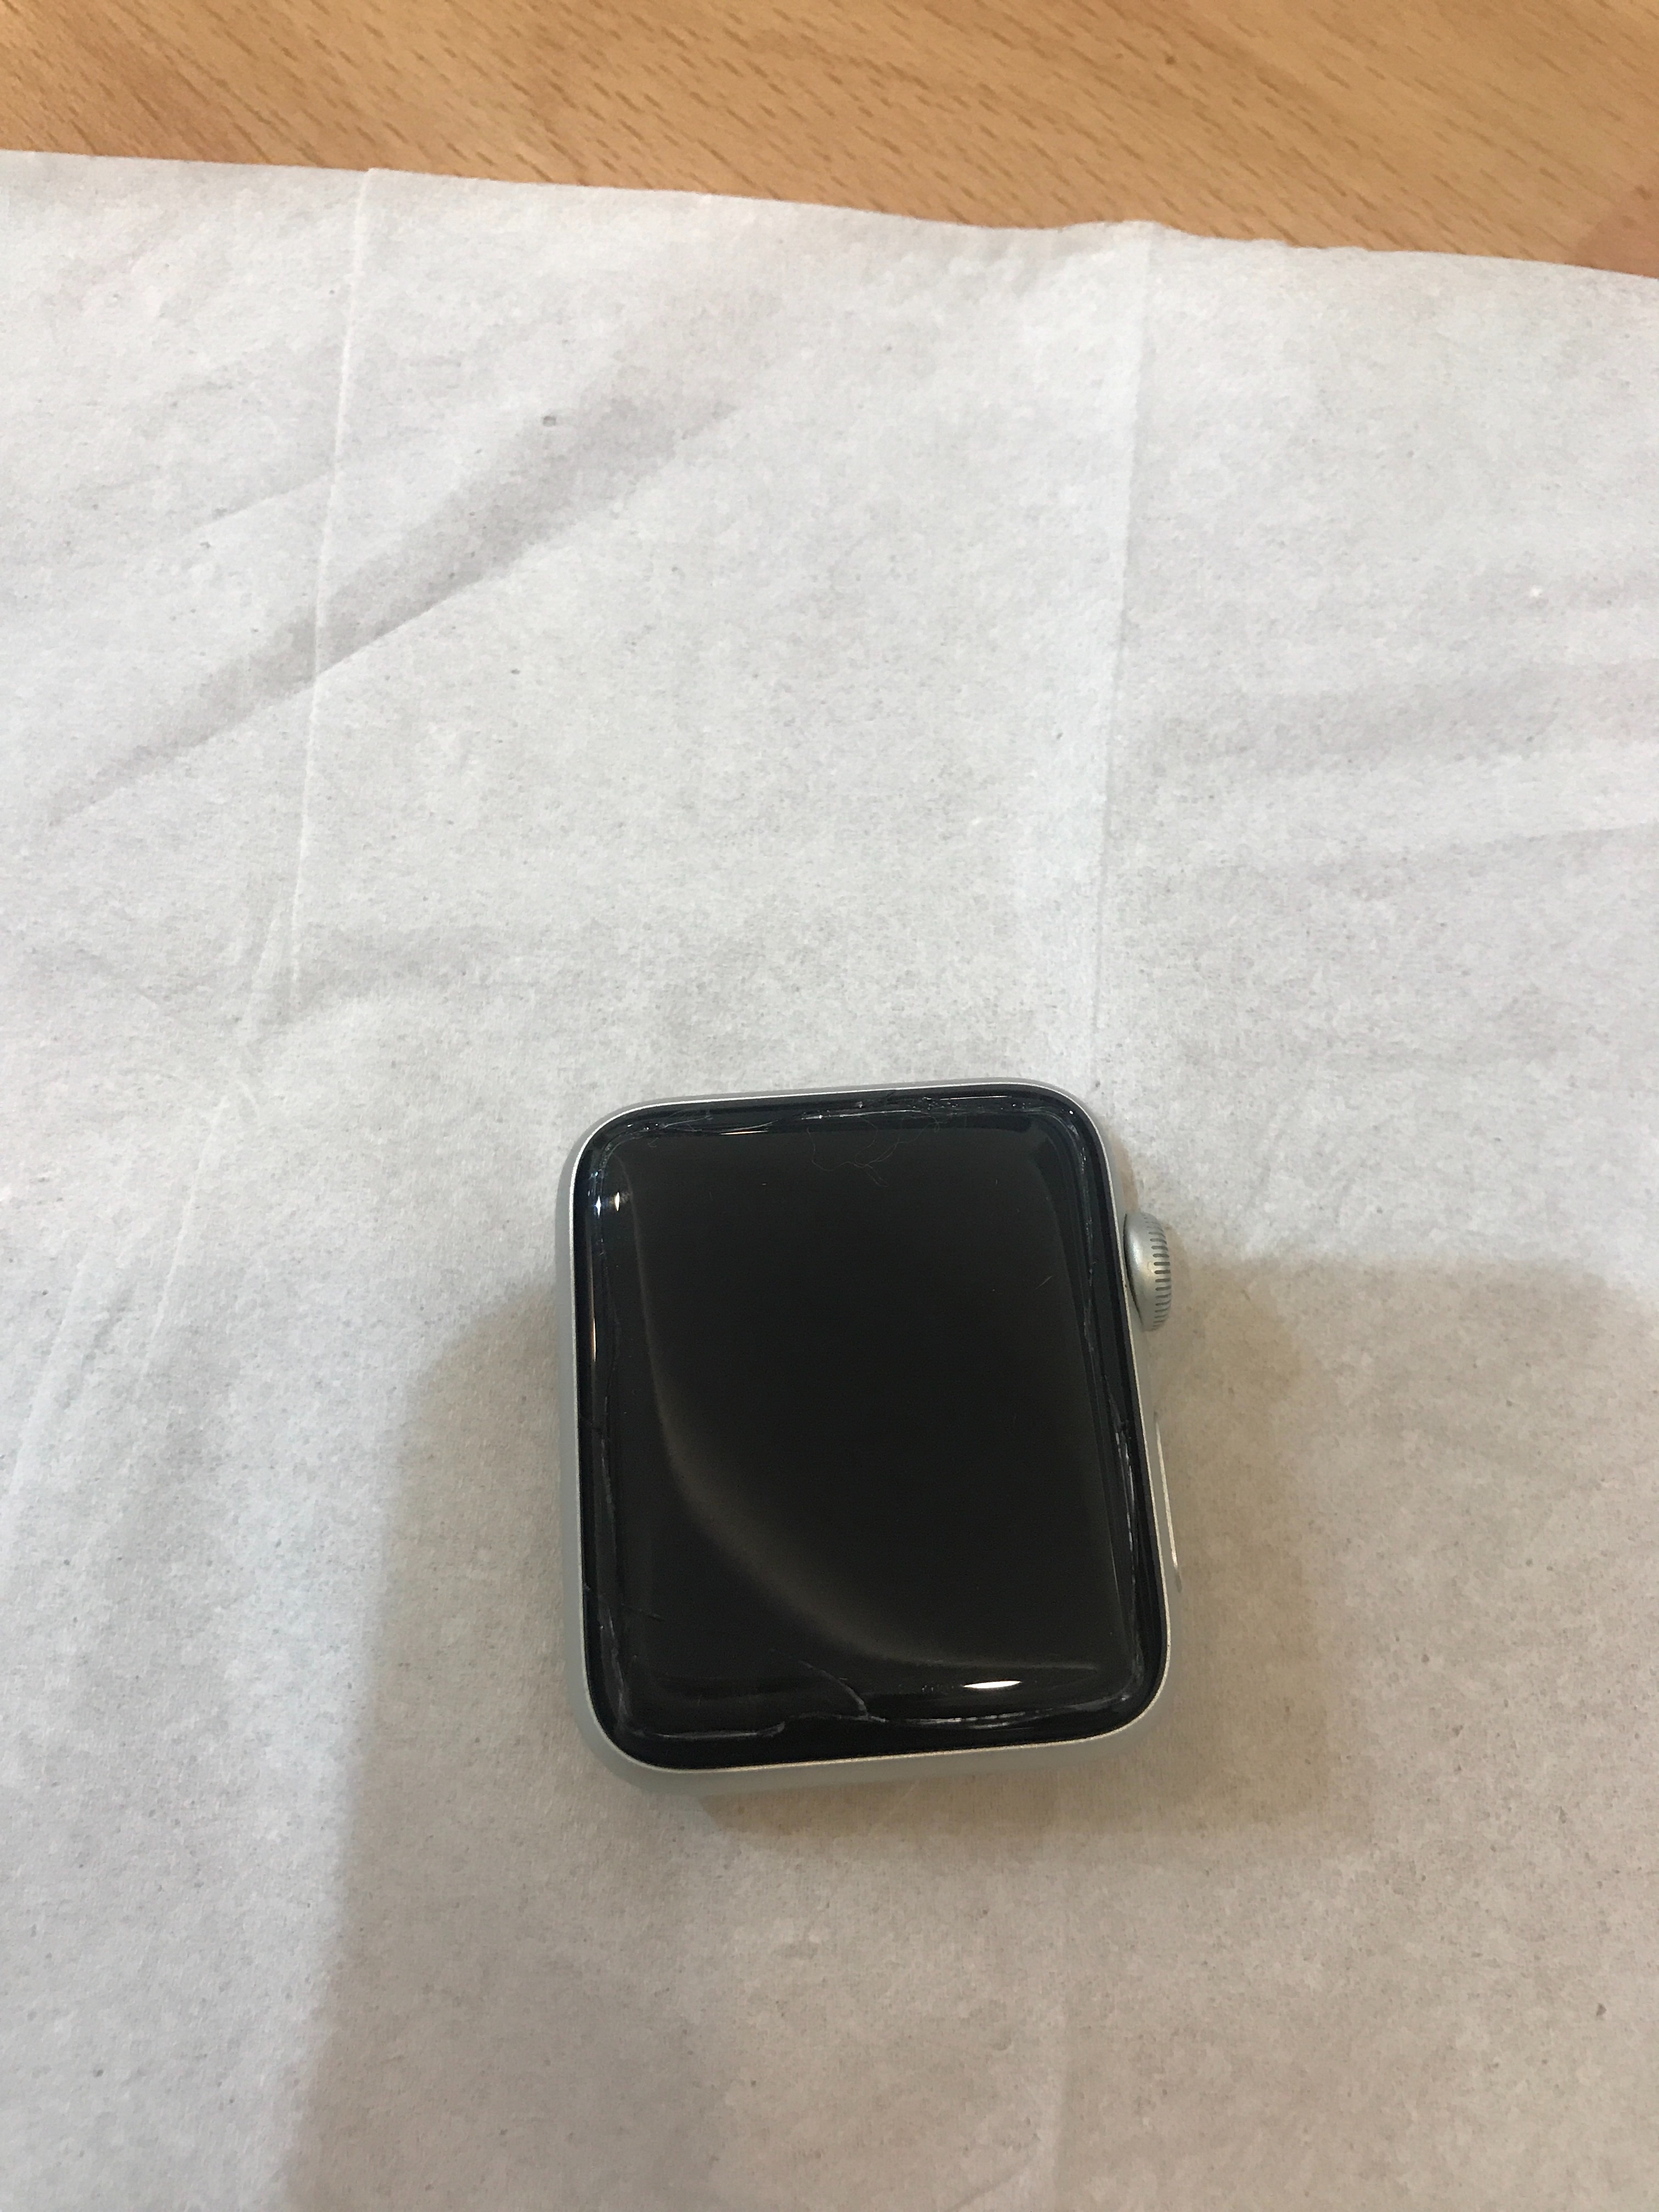 i have Apple Watch series 3 The screen i… - Apple Community